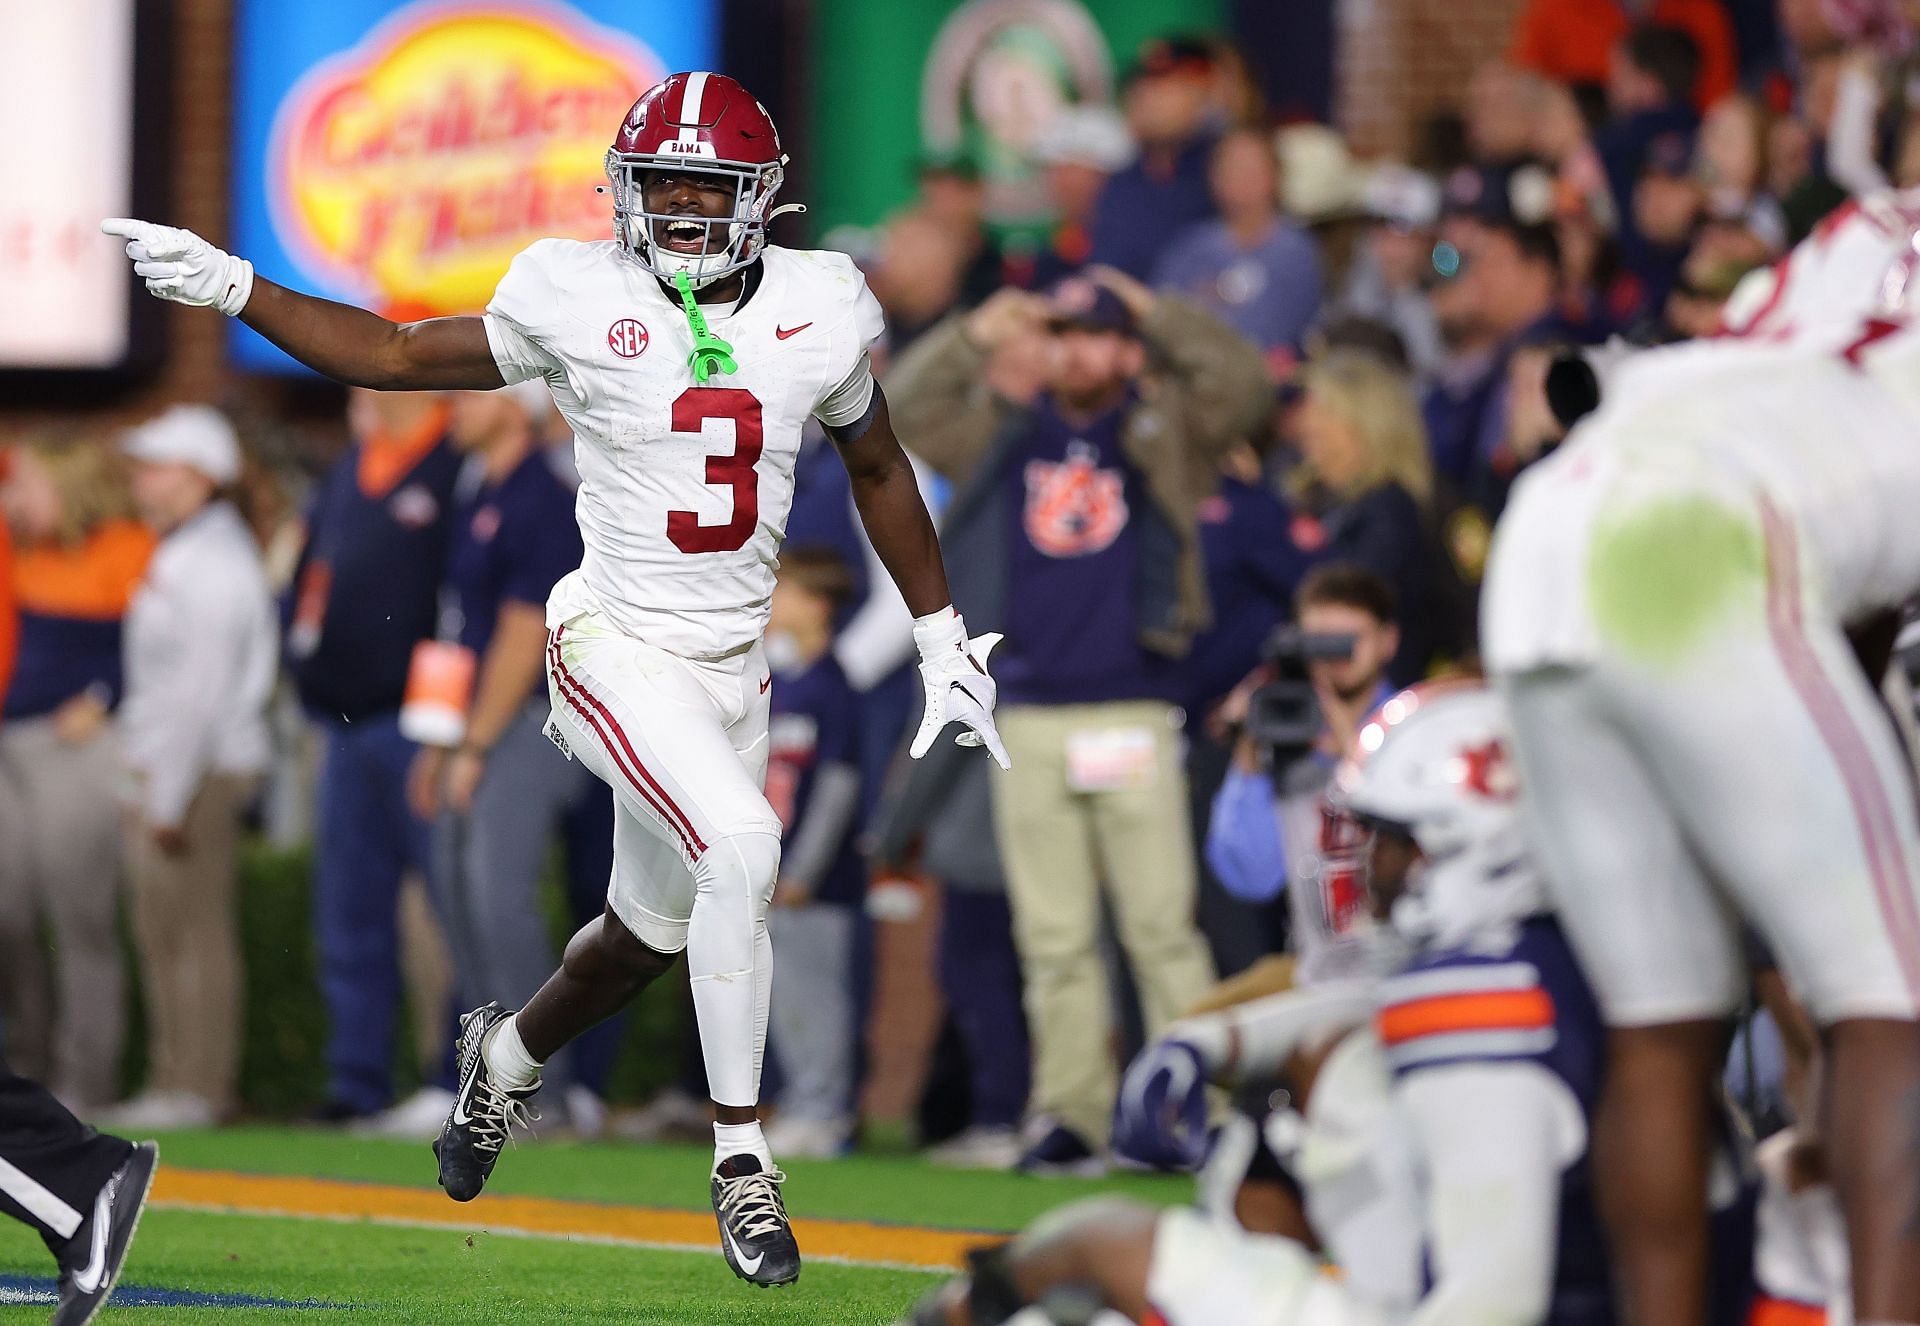 Terrion Arnold #3 of the Alabama Crimson Tide reacts after intercepting the final pass of the game in their 27-24 win over the Auburn Tigers